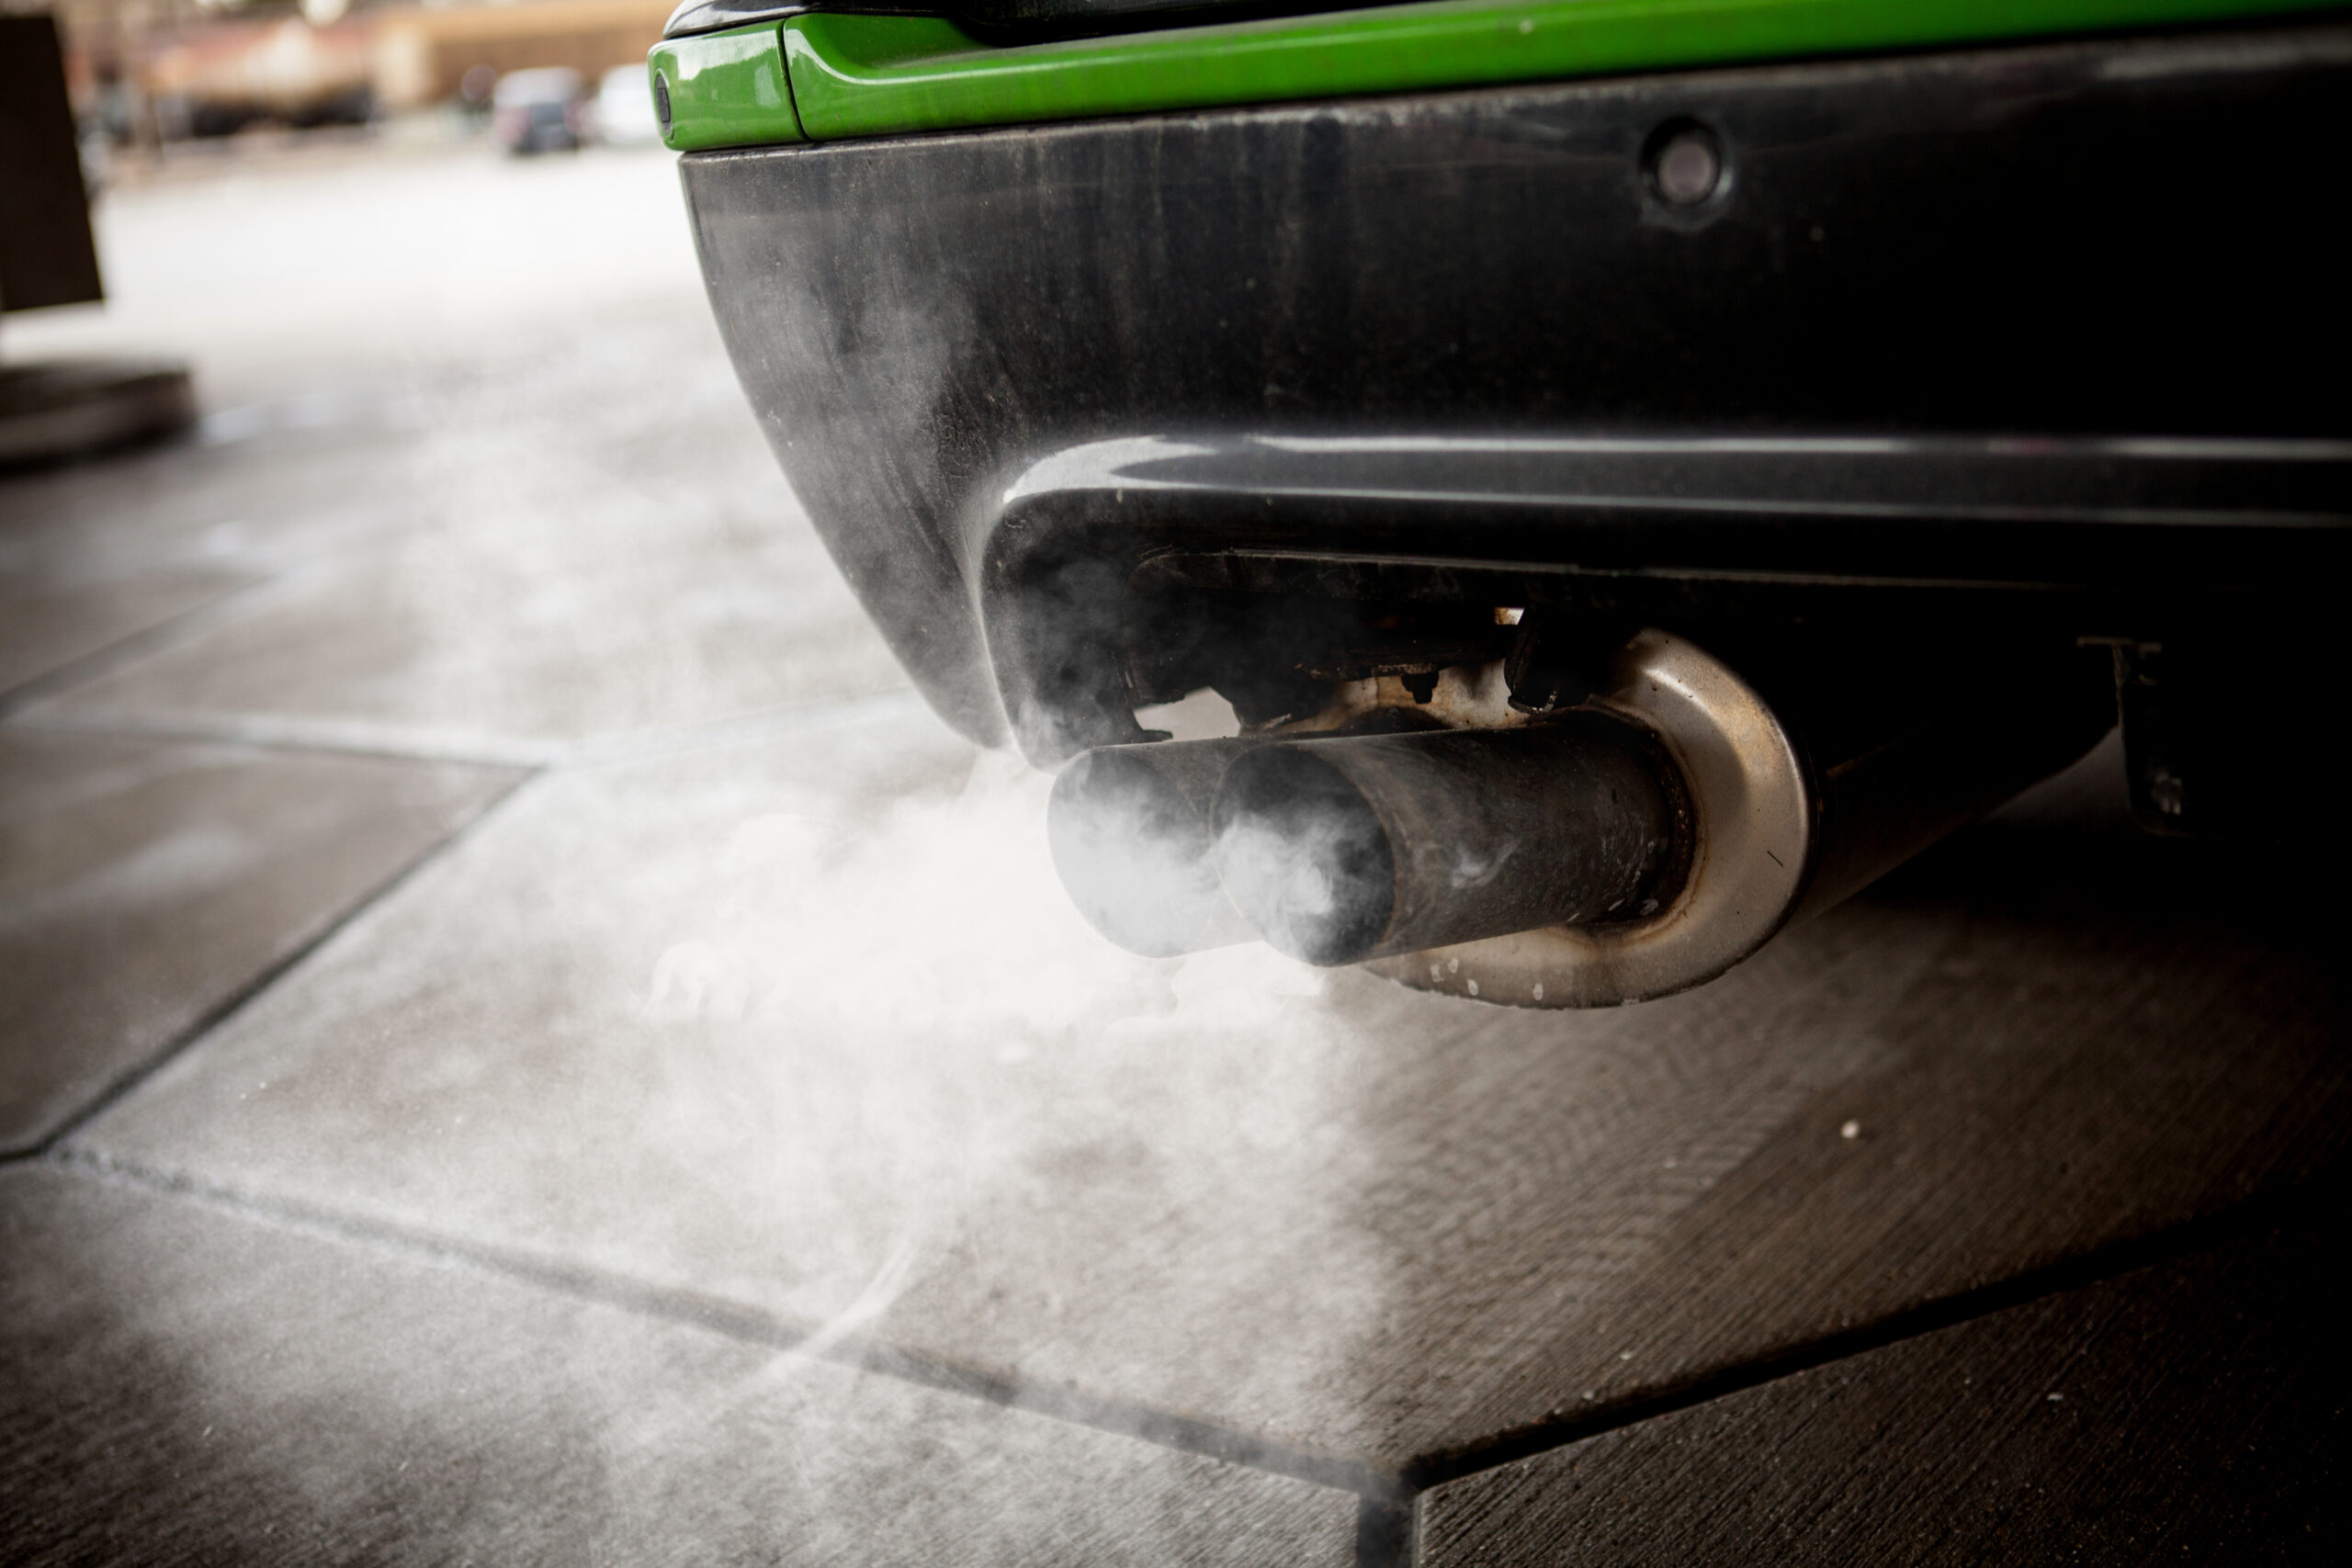 These cleaners are more dangerous than car exhaust fumes